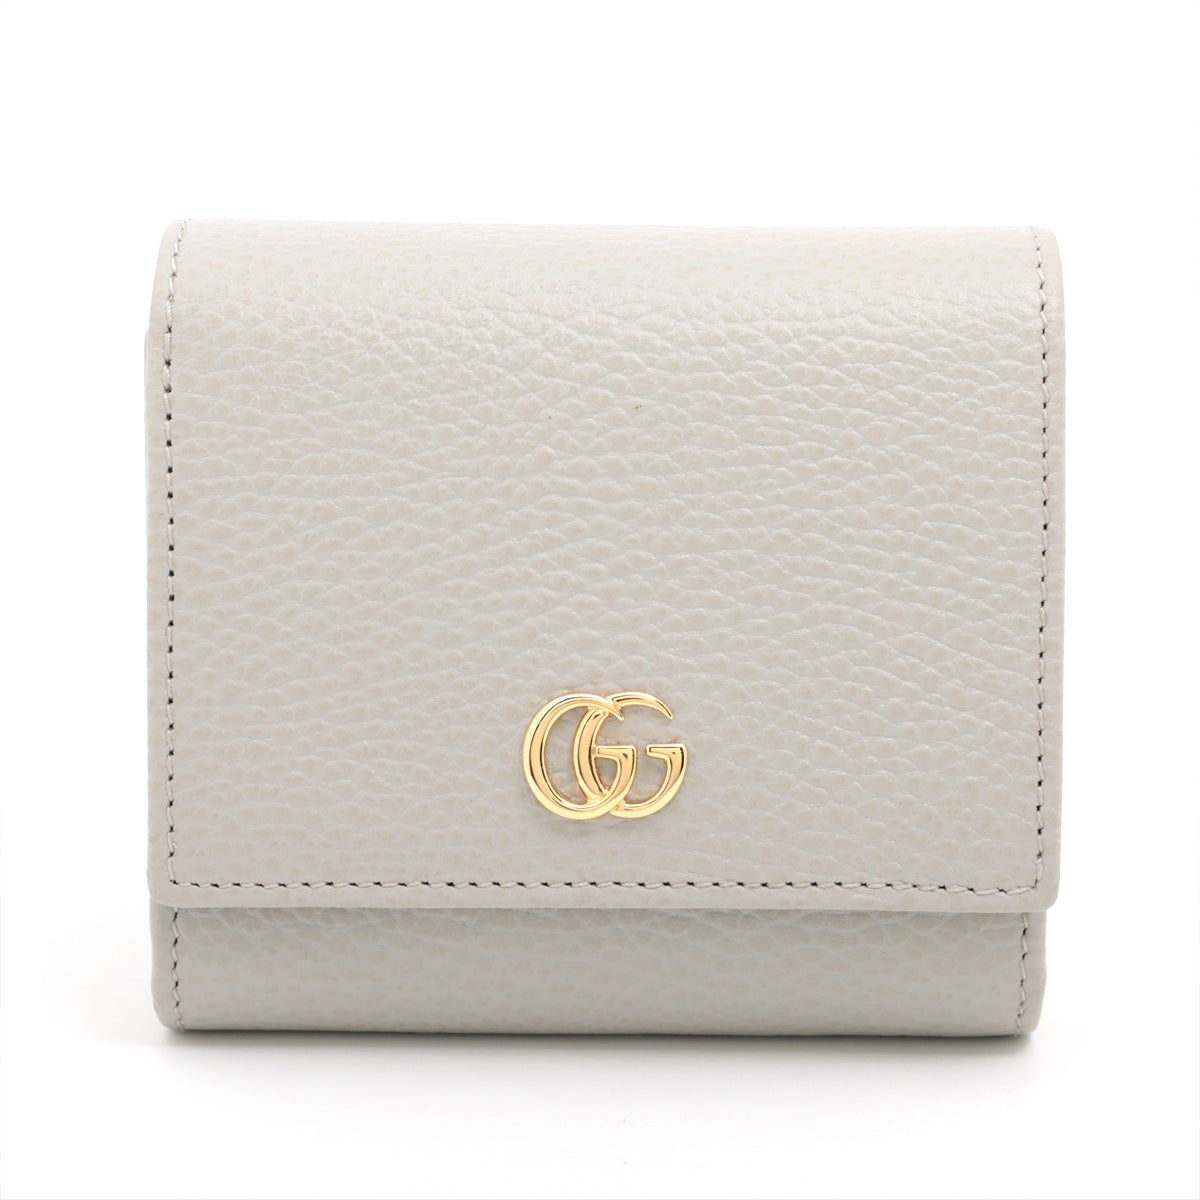 Gucci GG Marmont 598587 Leather Wallet Grey